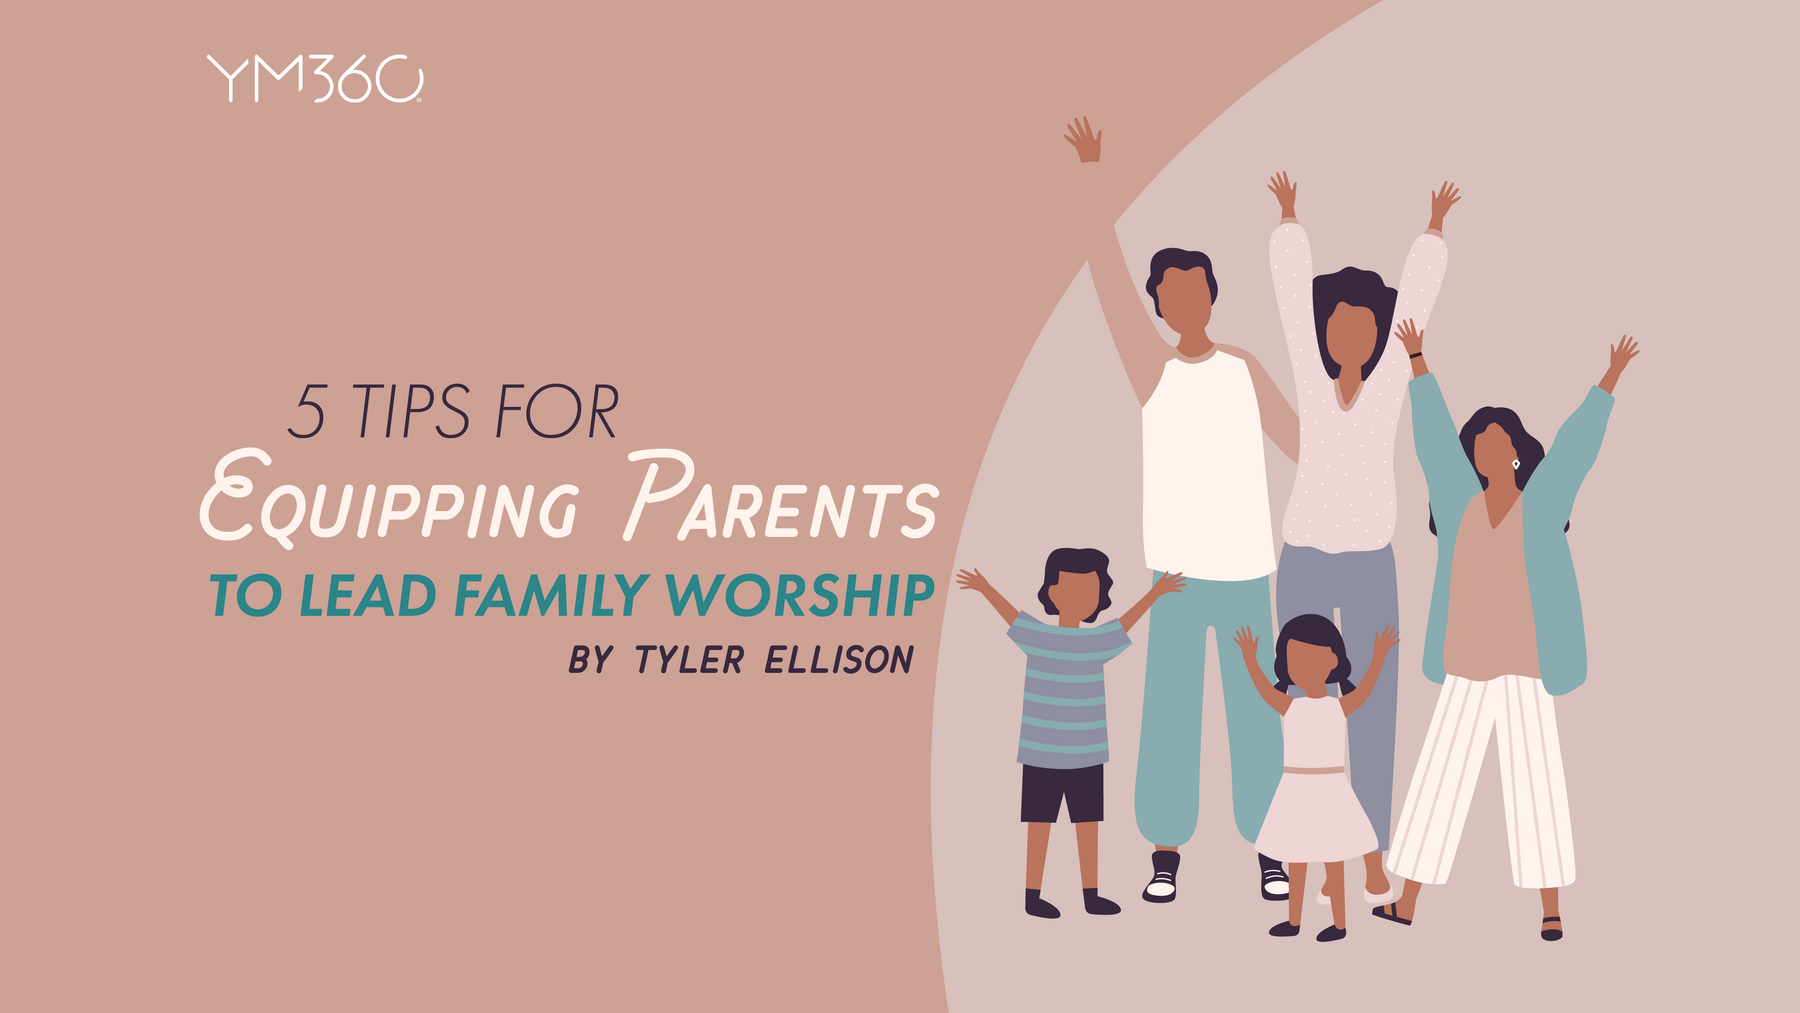 5 Tips for Equipping Parents to Lead Family Worship